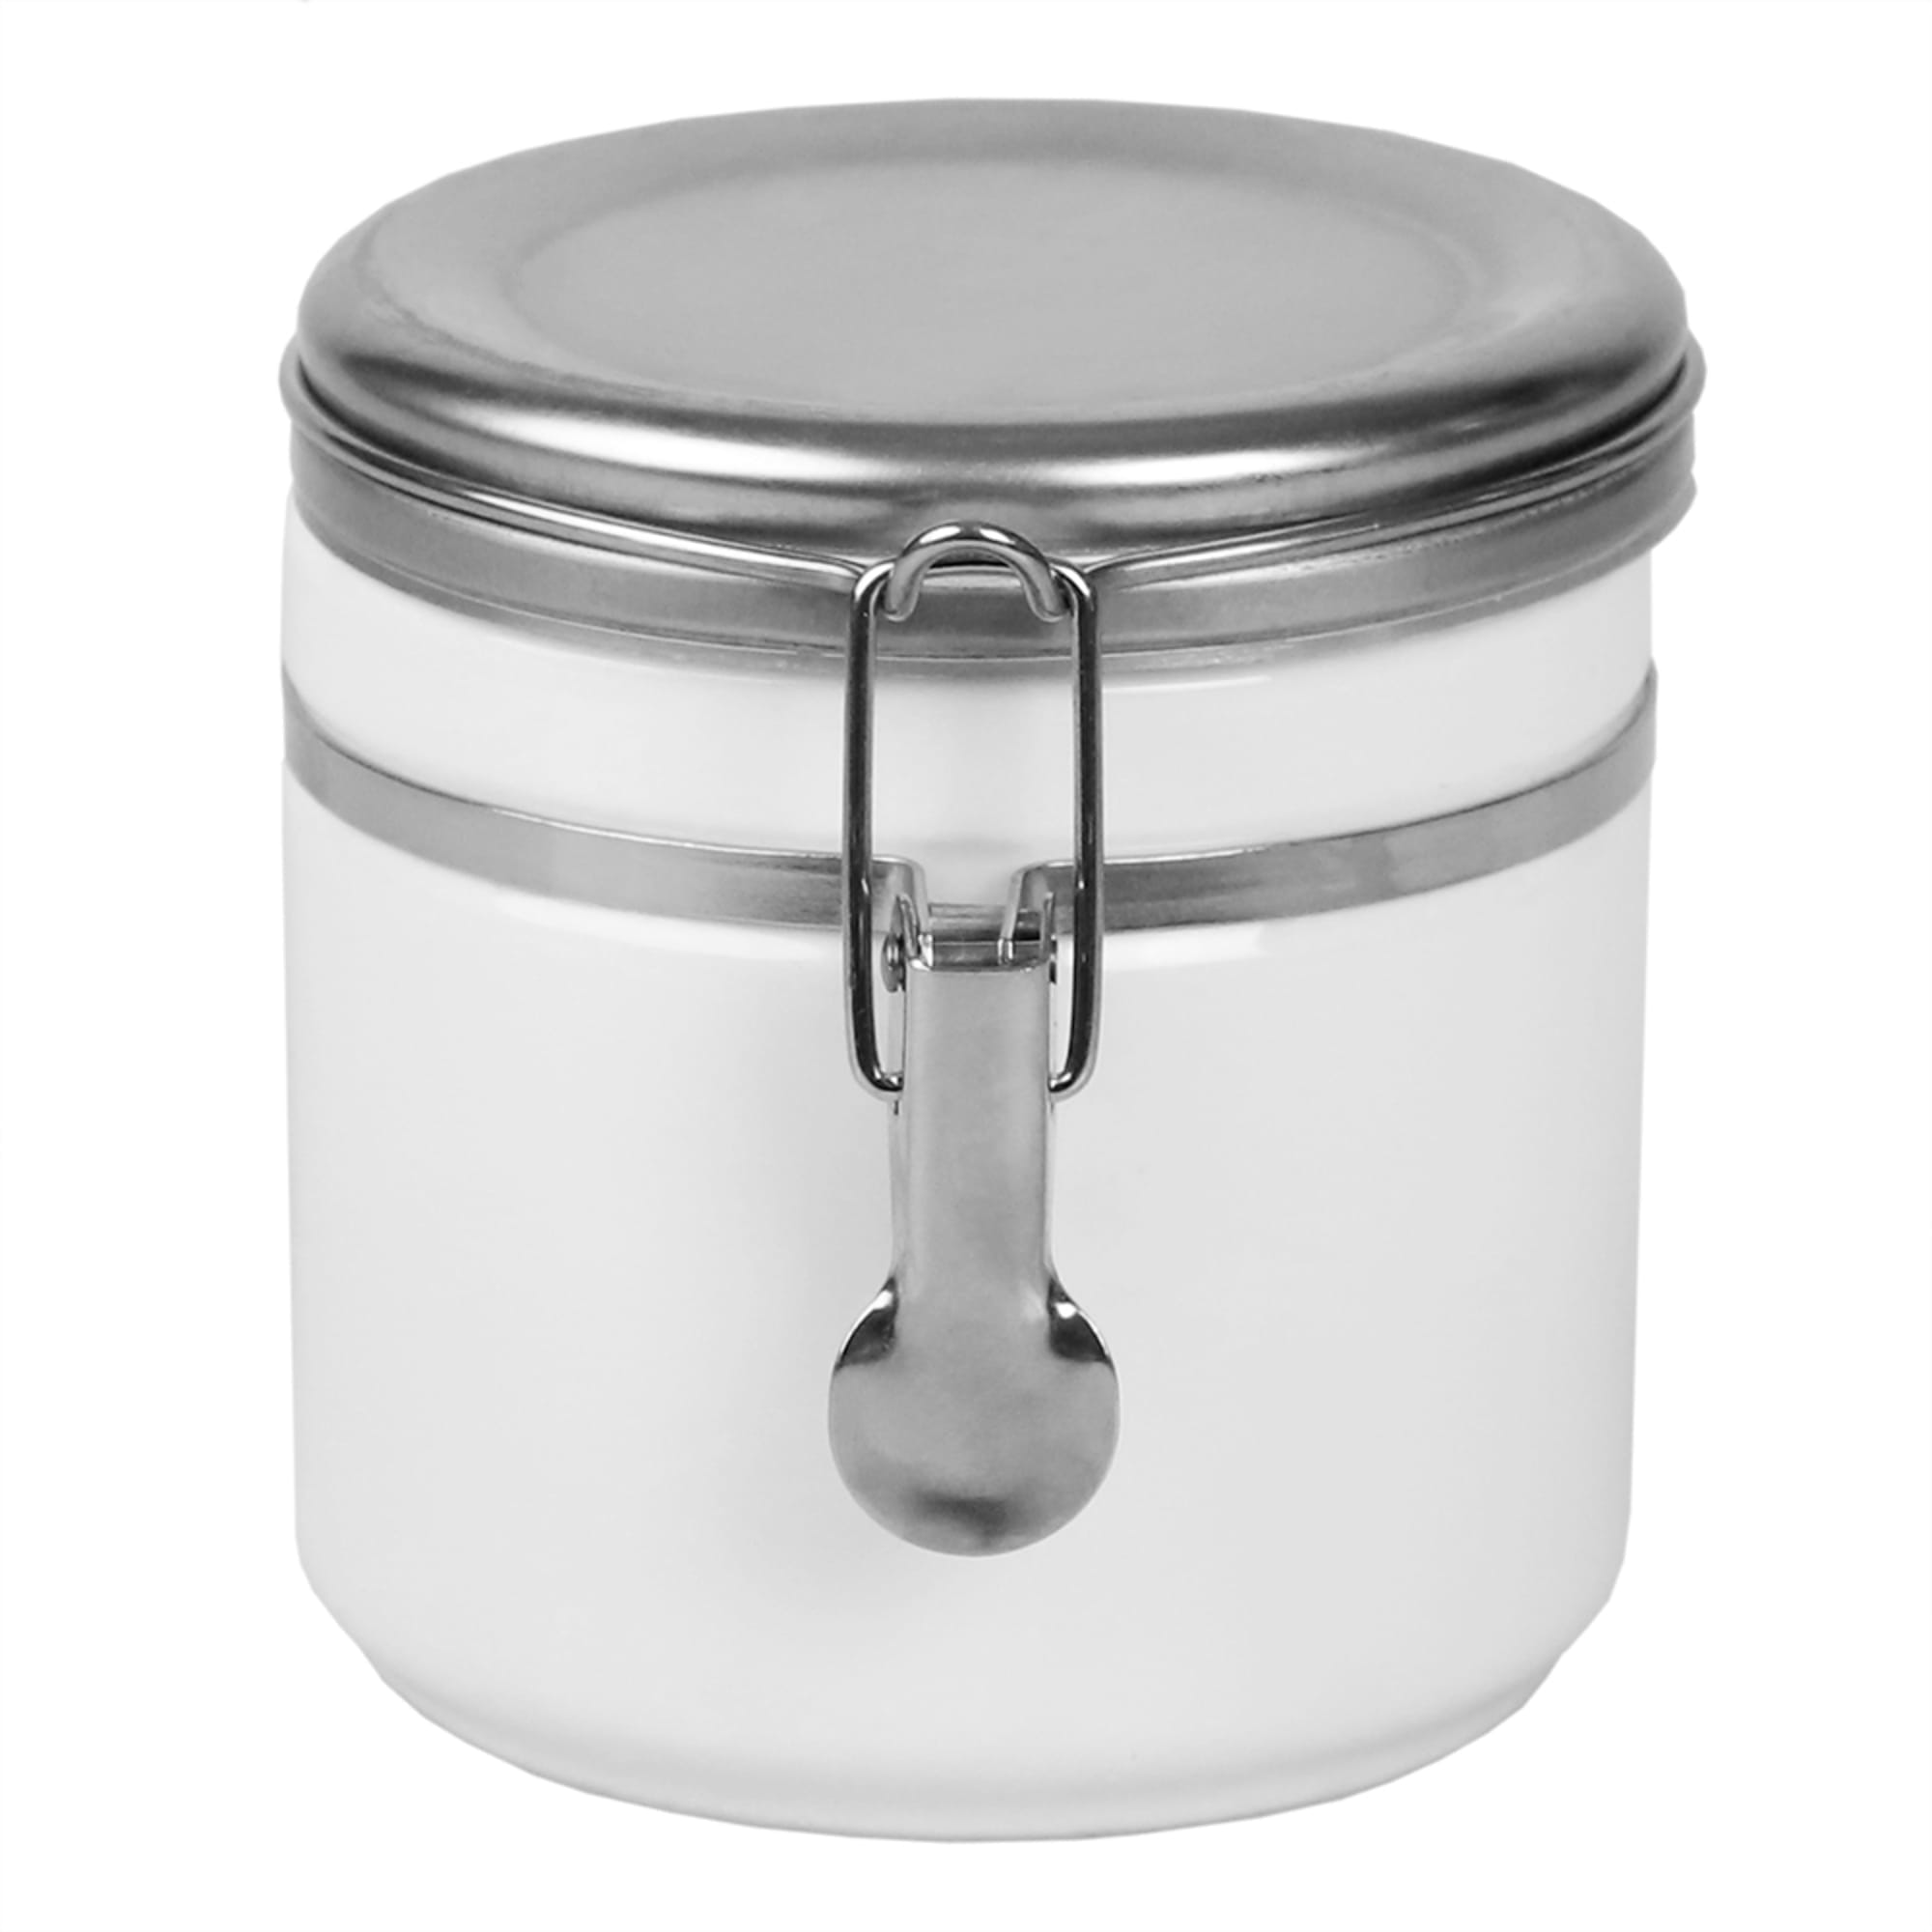 Home Basics 25 oz. Canister with Stainless Steel Top, White $5 EACH, CASE PACK OF 8